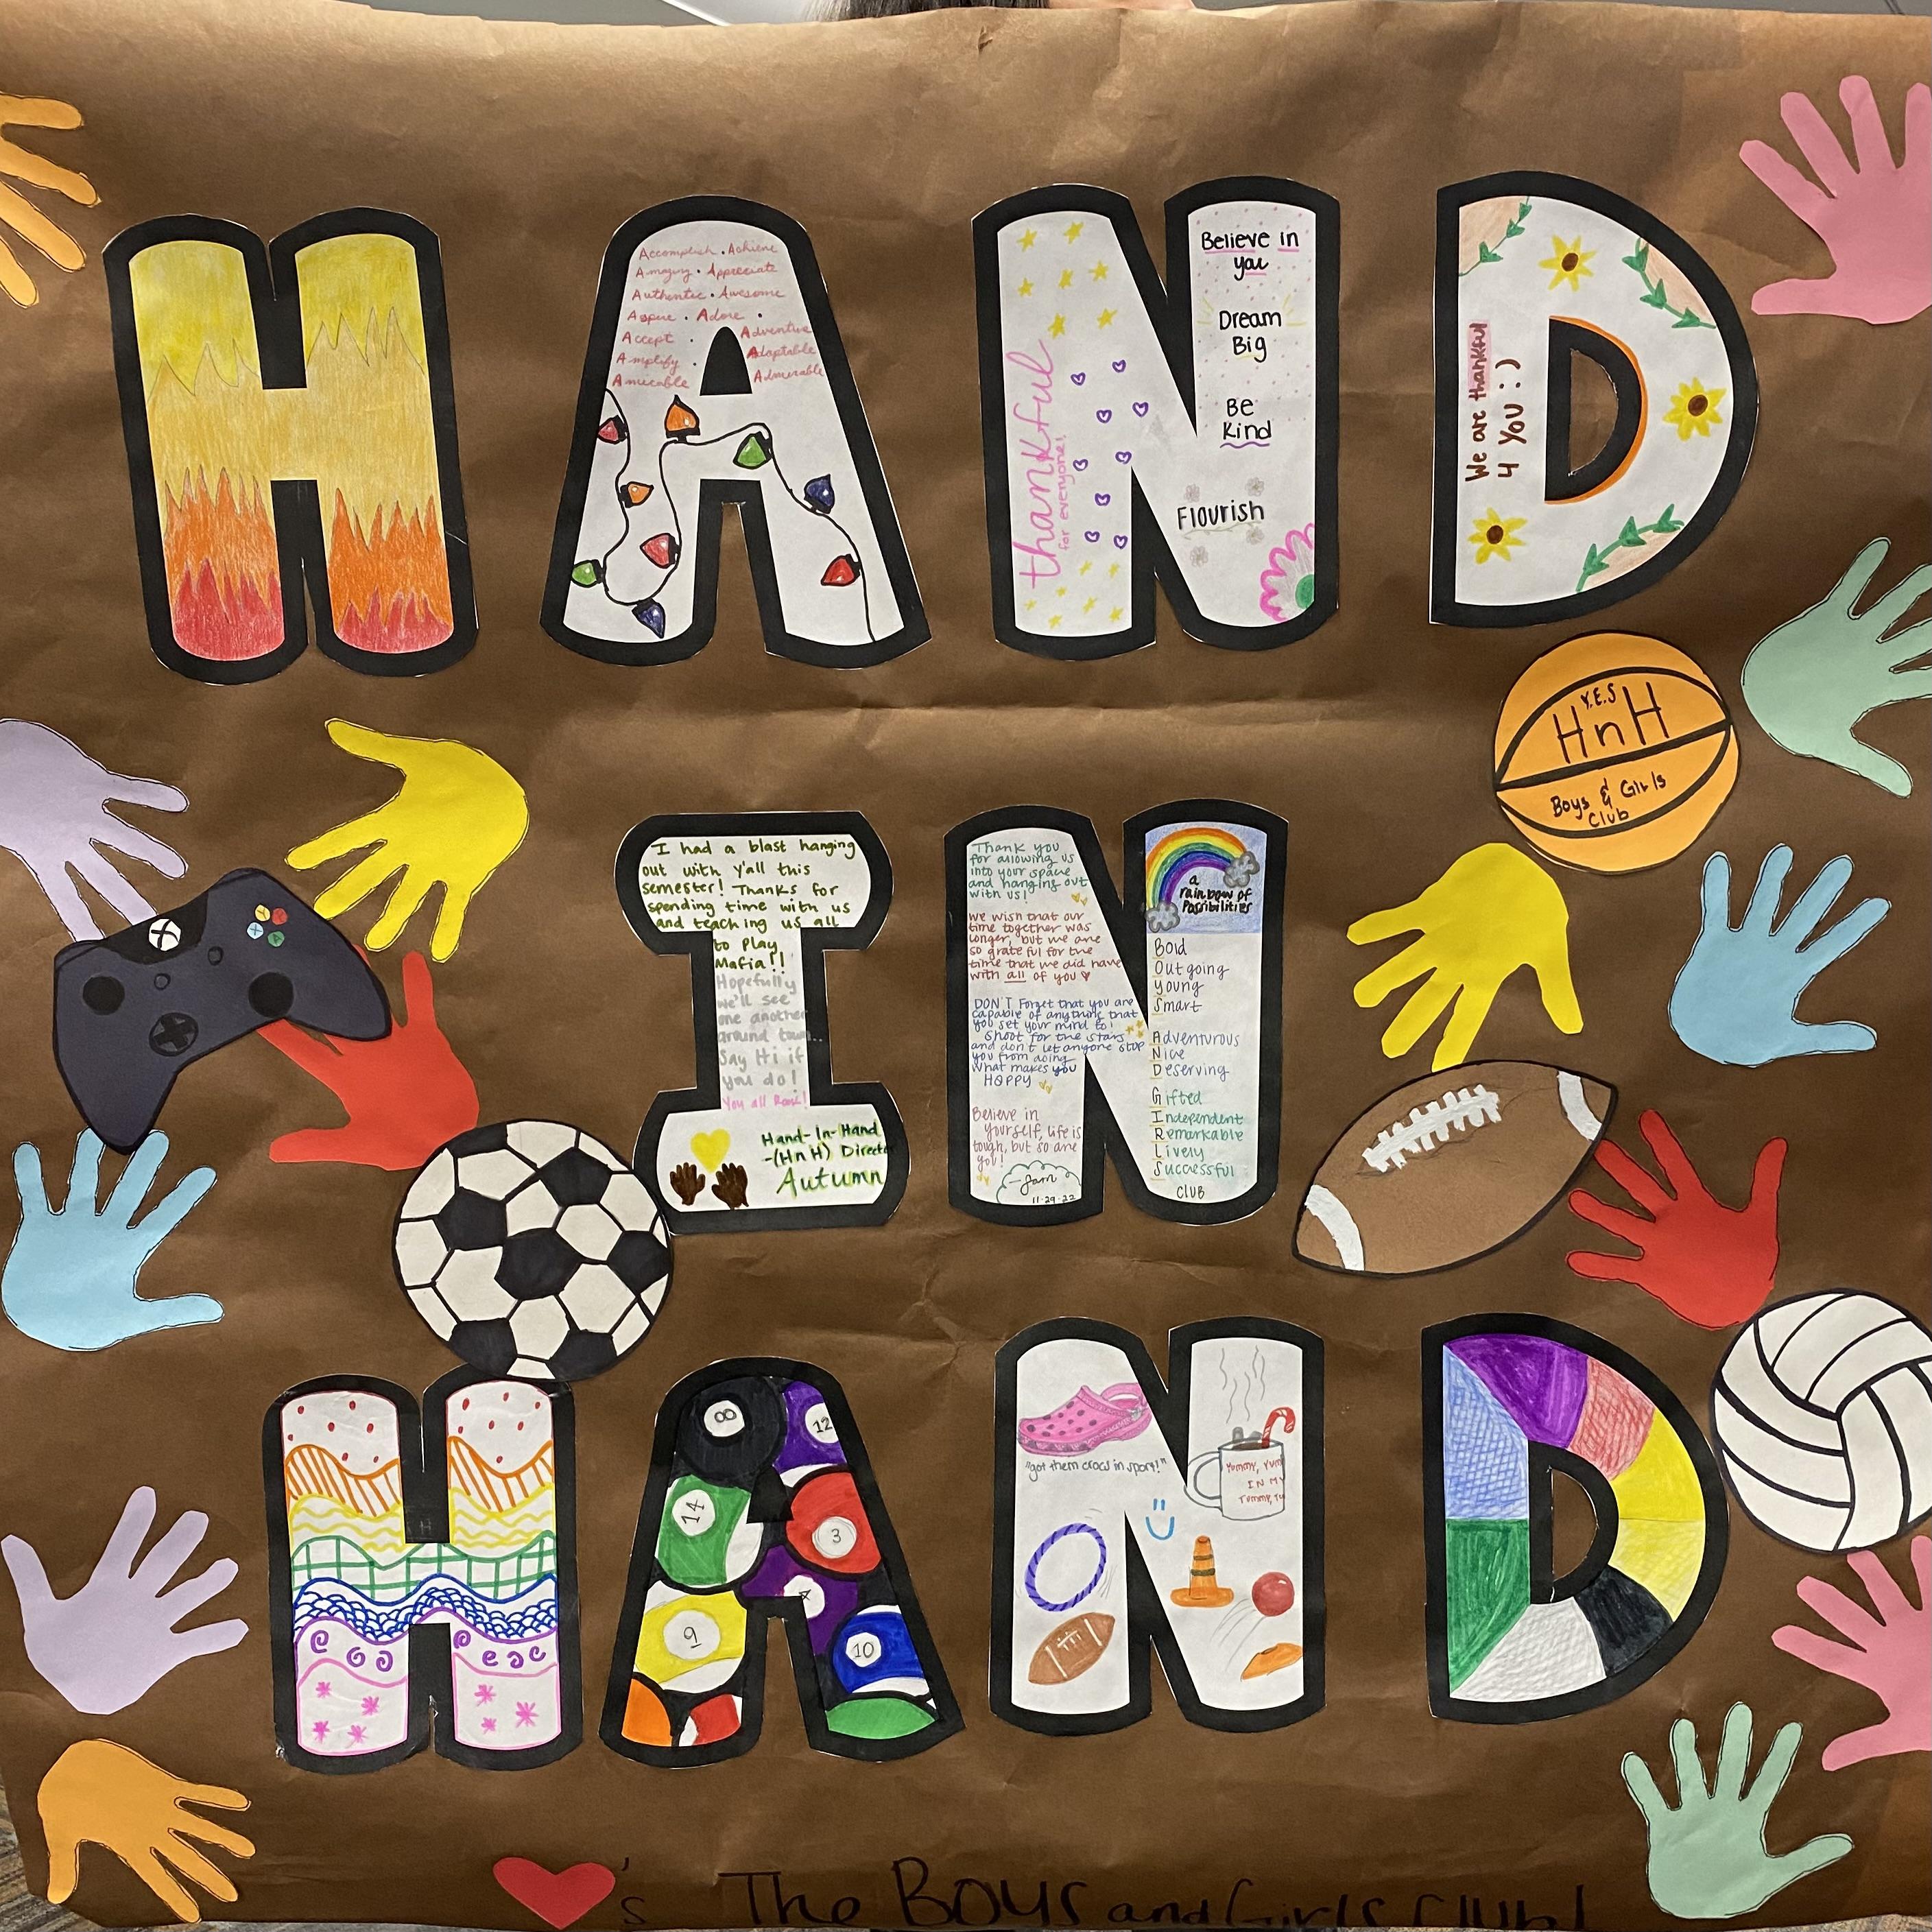 Hand-in-Hand volunteers created an appreciation poster for the youth at the Boys and Girls Club